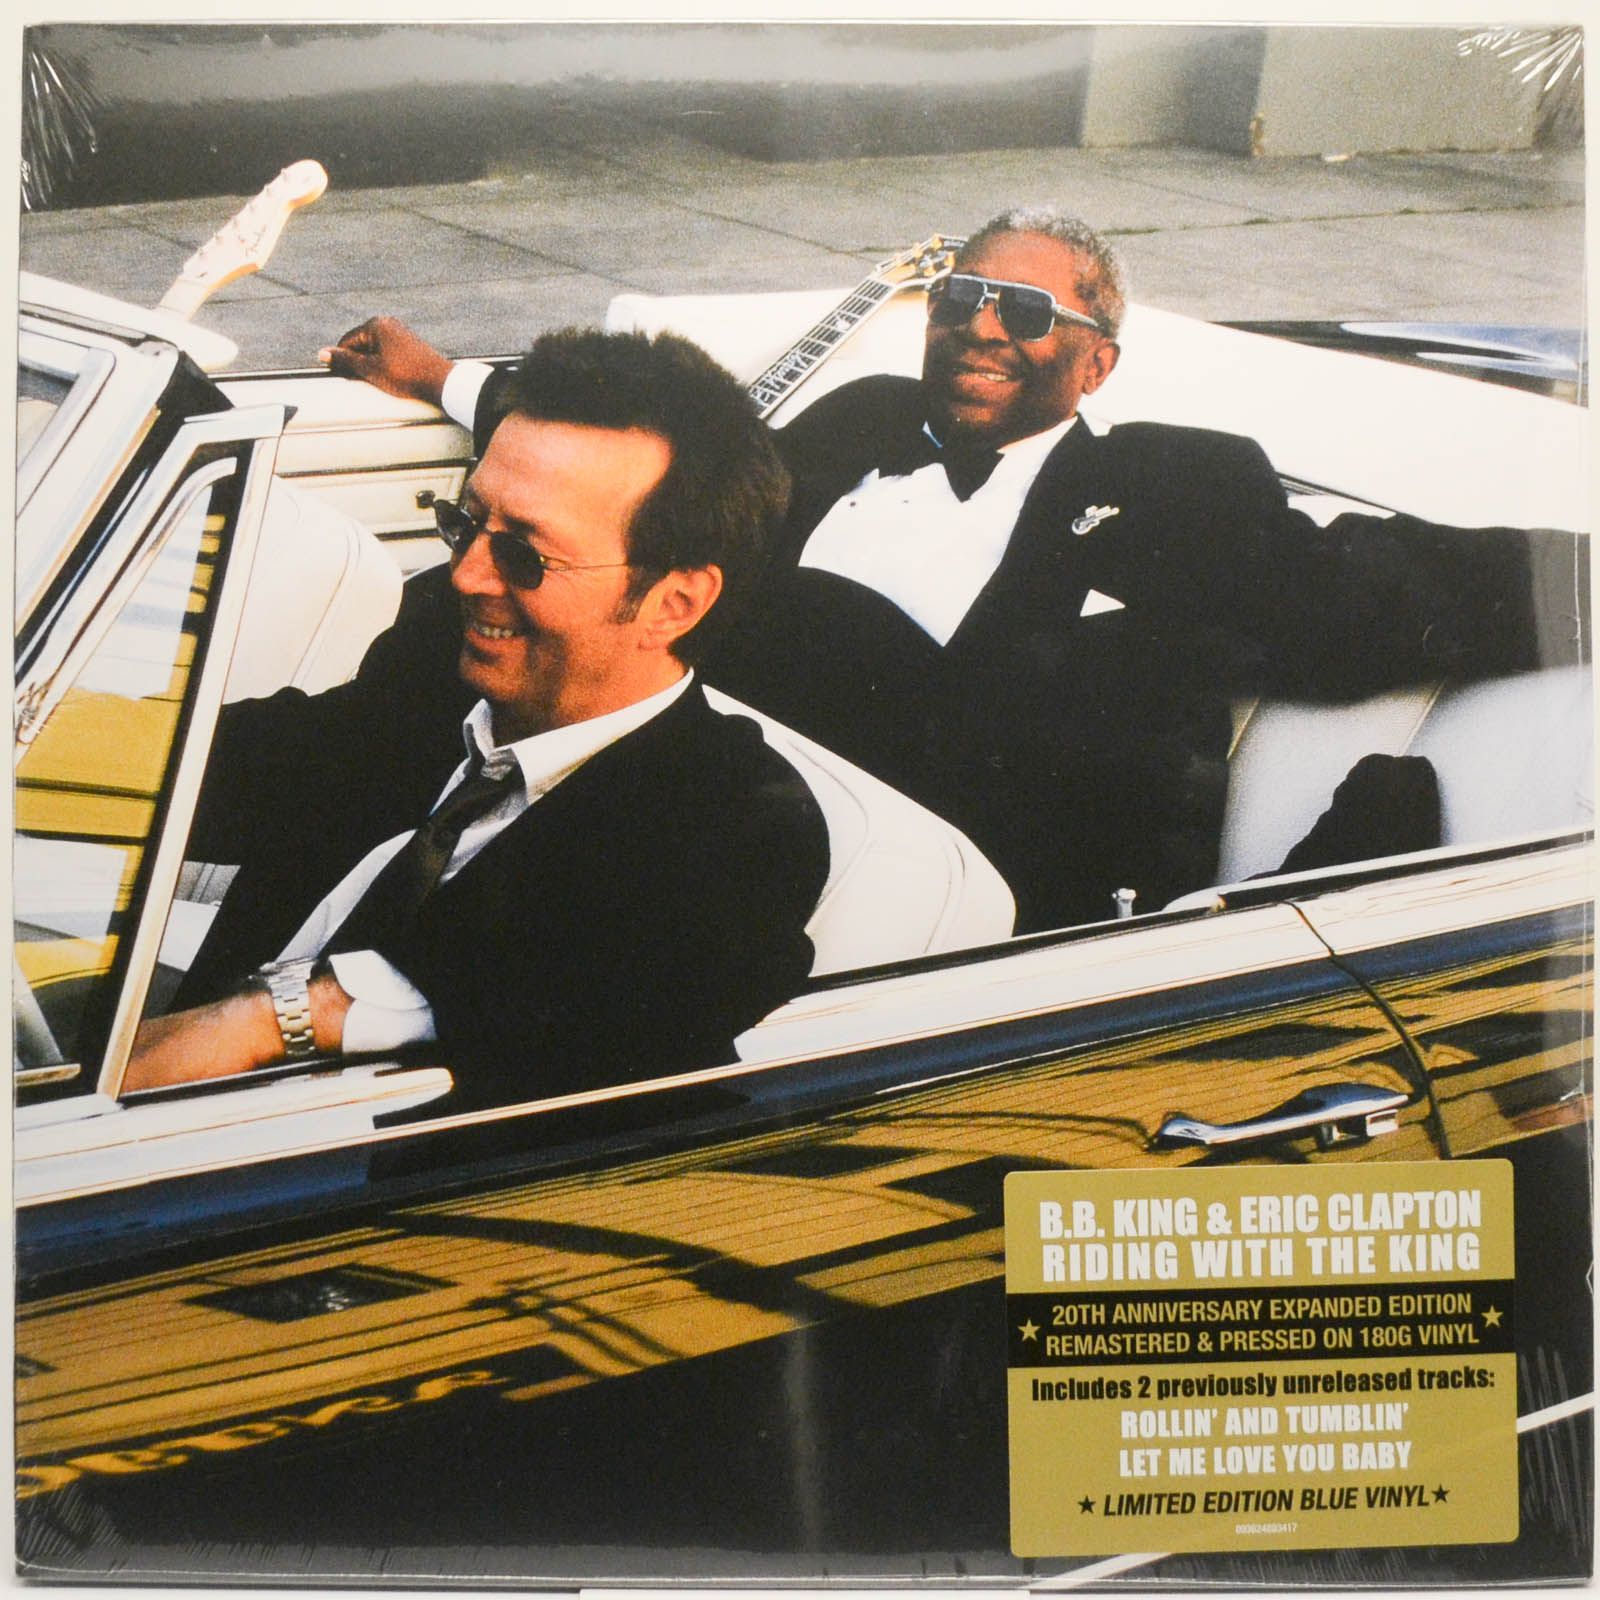 B.B. King & Eric Clapton — Riding With The King (2LP), 2000